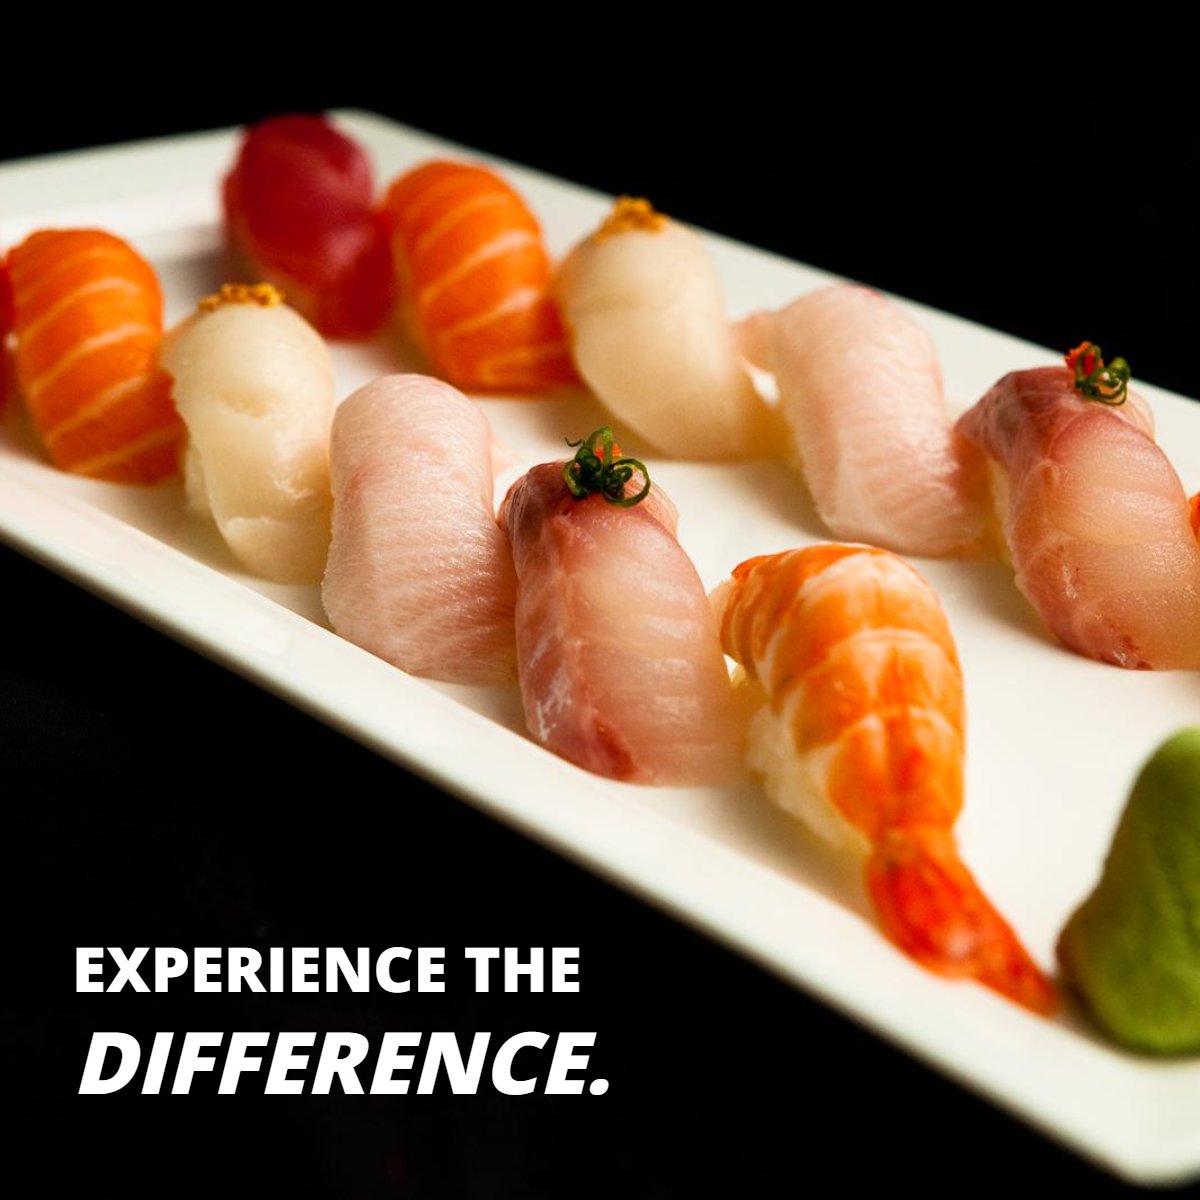 We're not your typical sushi bar. We offer our diners an unparalleled experience both in taste and ambiance. Dine with us today to experience the difference. #UniSushi #TheWoodlandsTexas